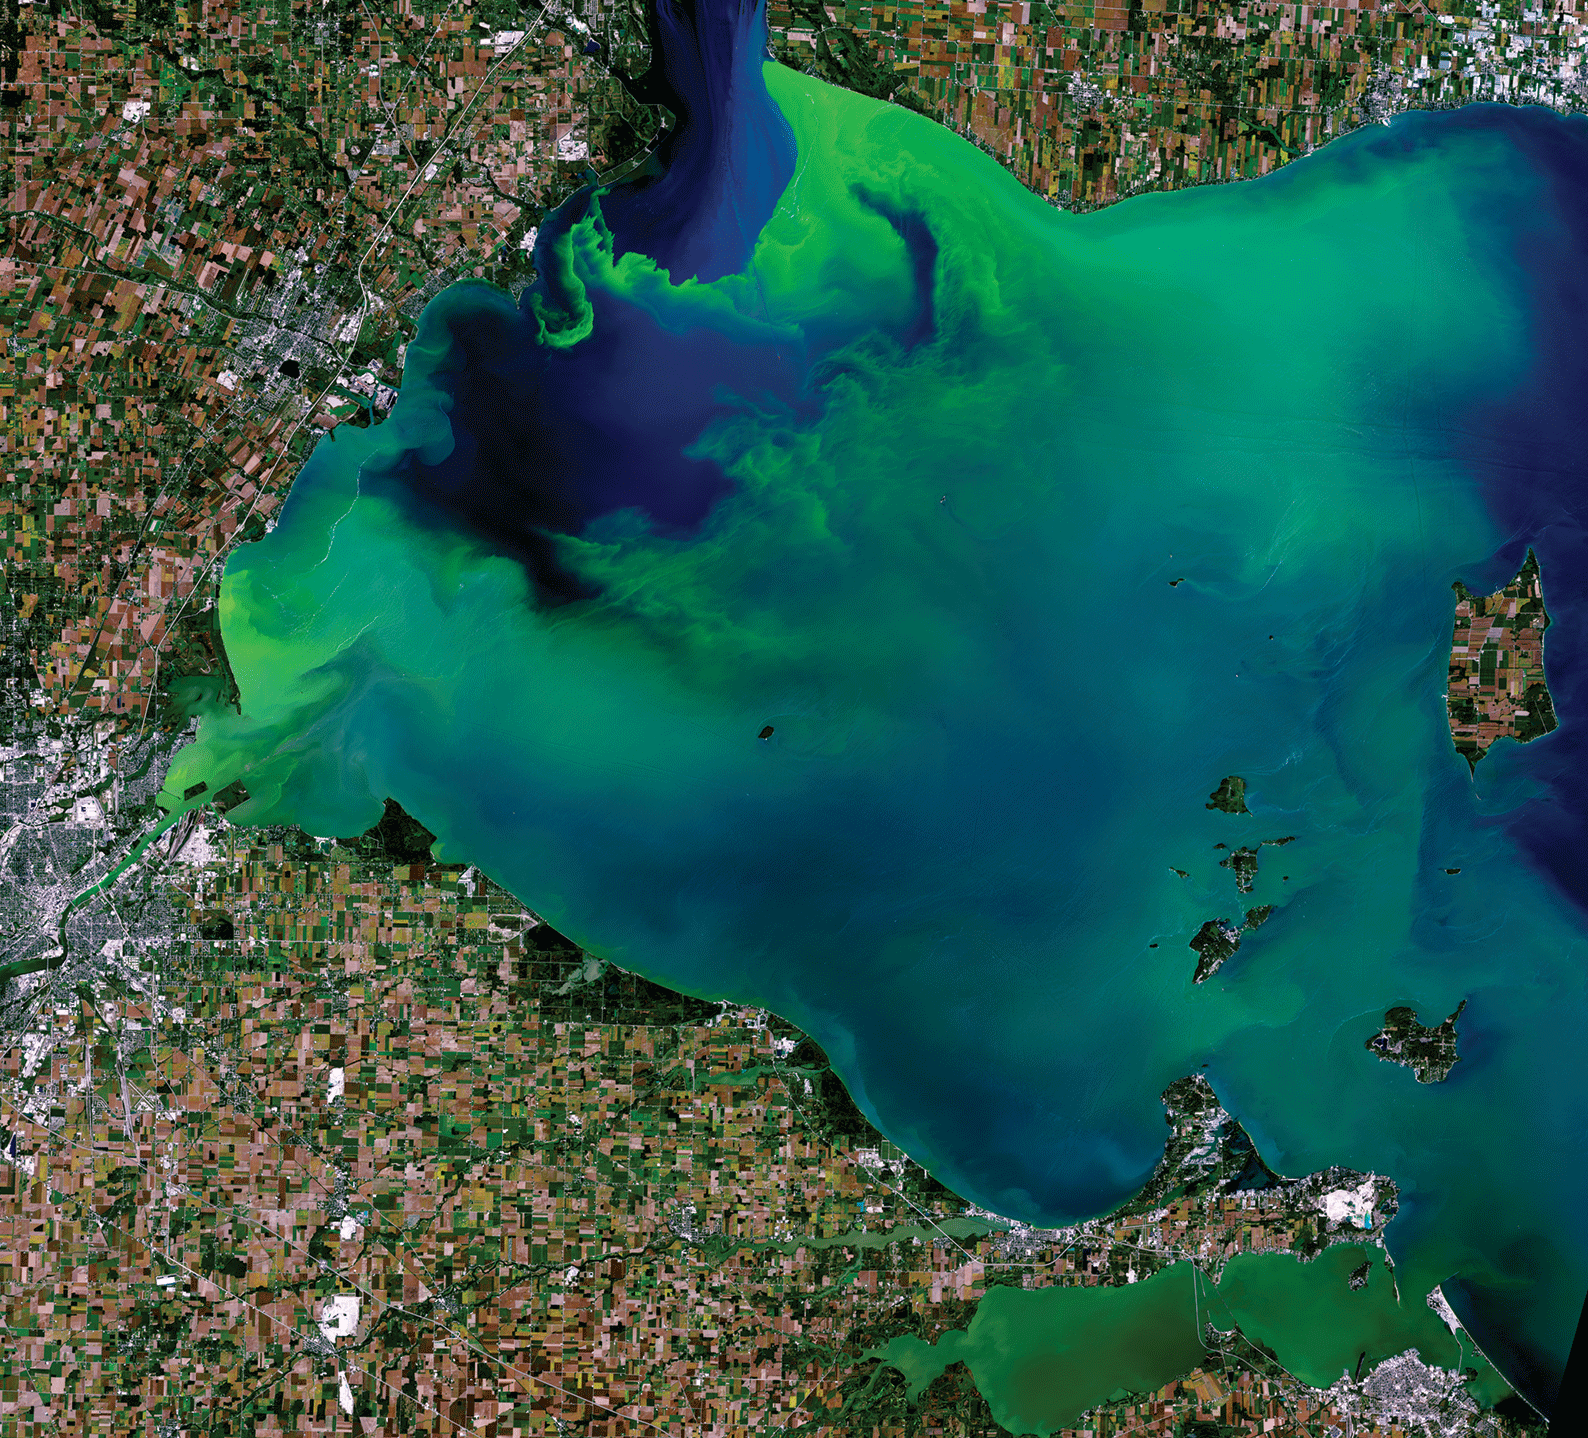 Landsat image shows most of the region of Lake Erie that is shown is affected by a
                     large phytoplankton bloom.